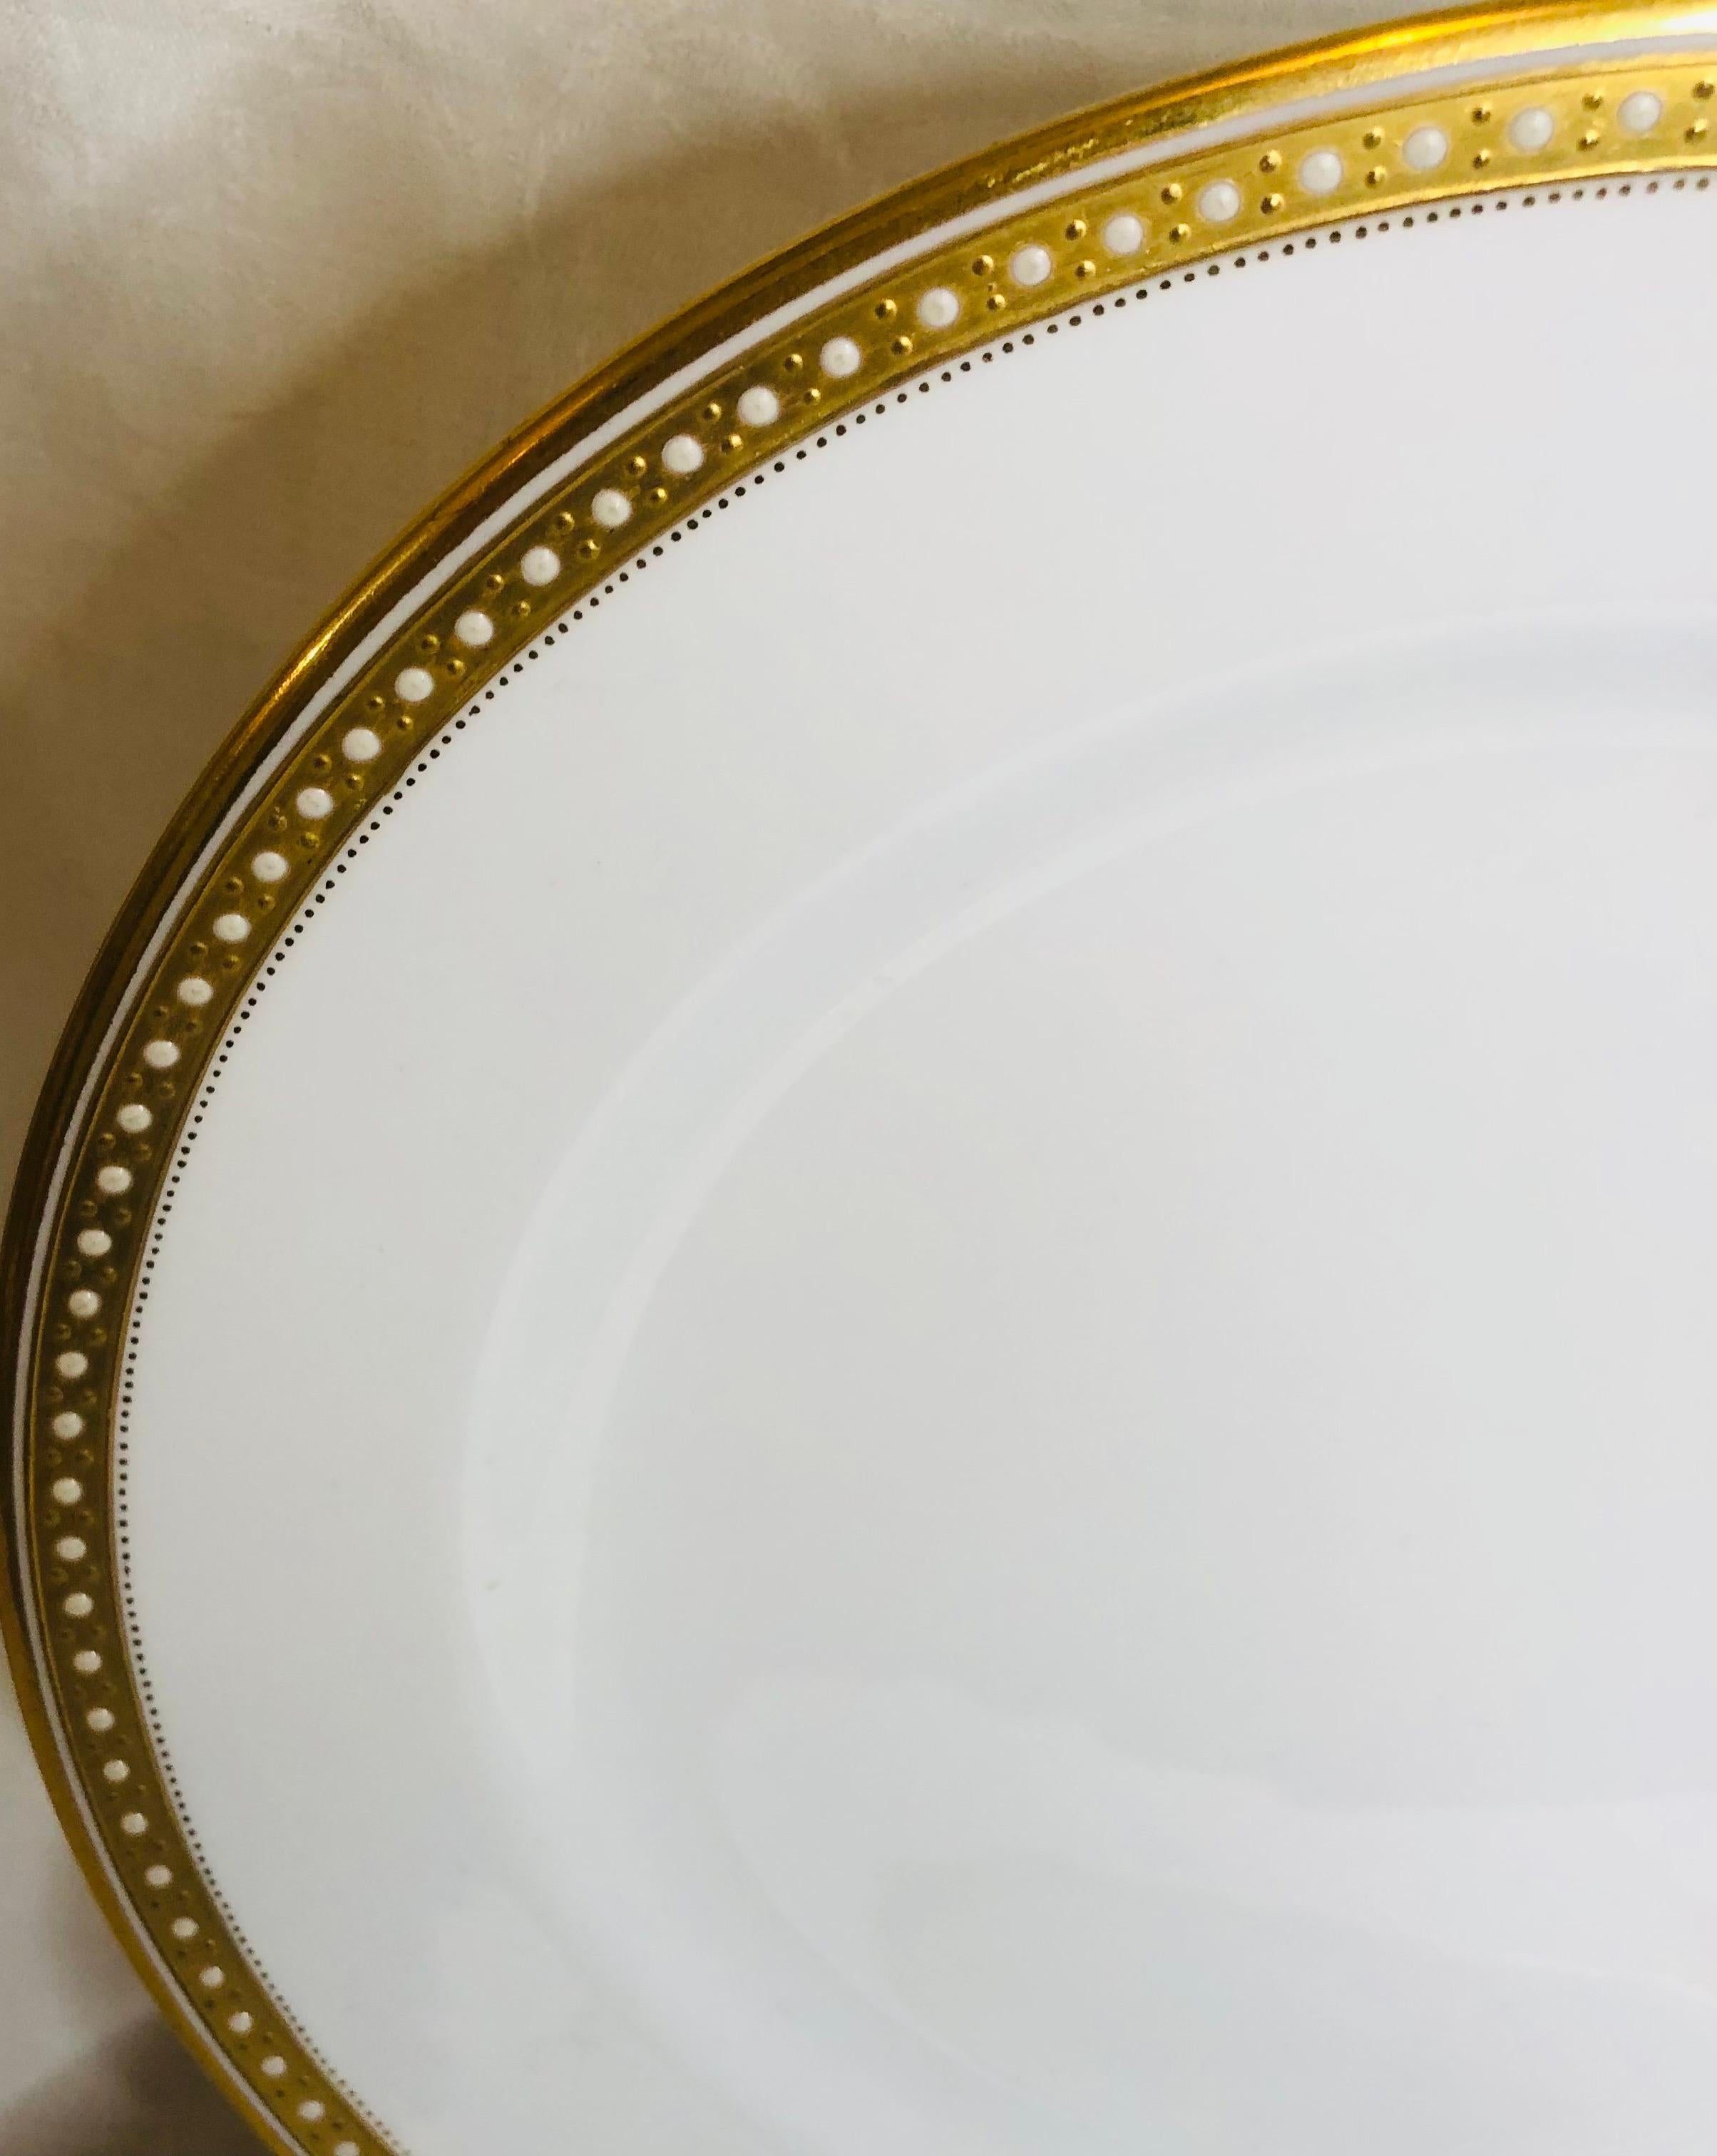 English 16 Copeland Spode Dinner Plates with Gold Rim & White Jeweling Made for T. Goode